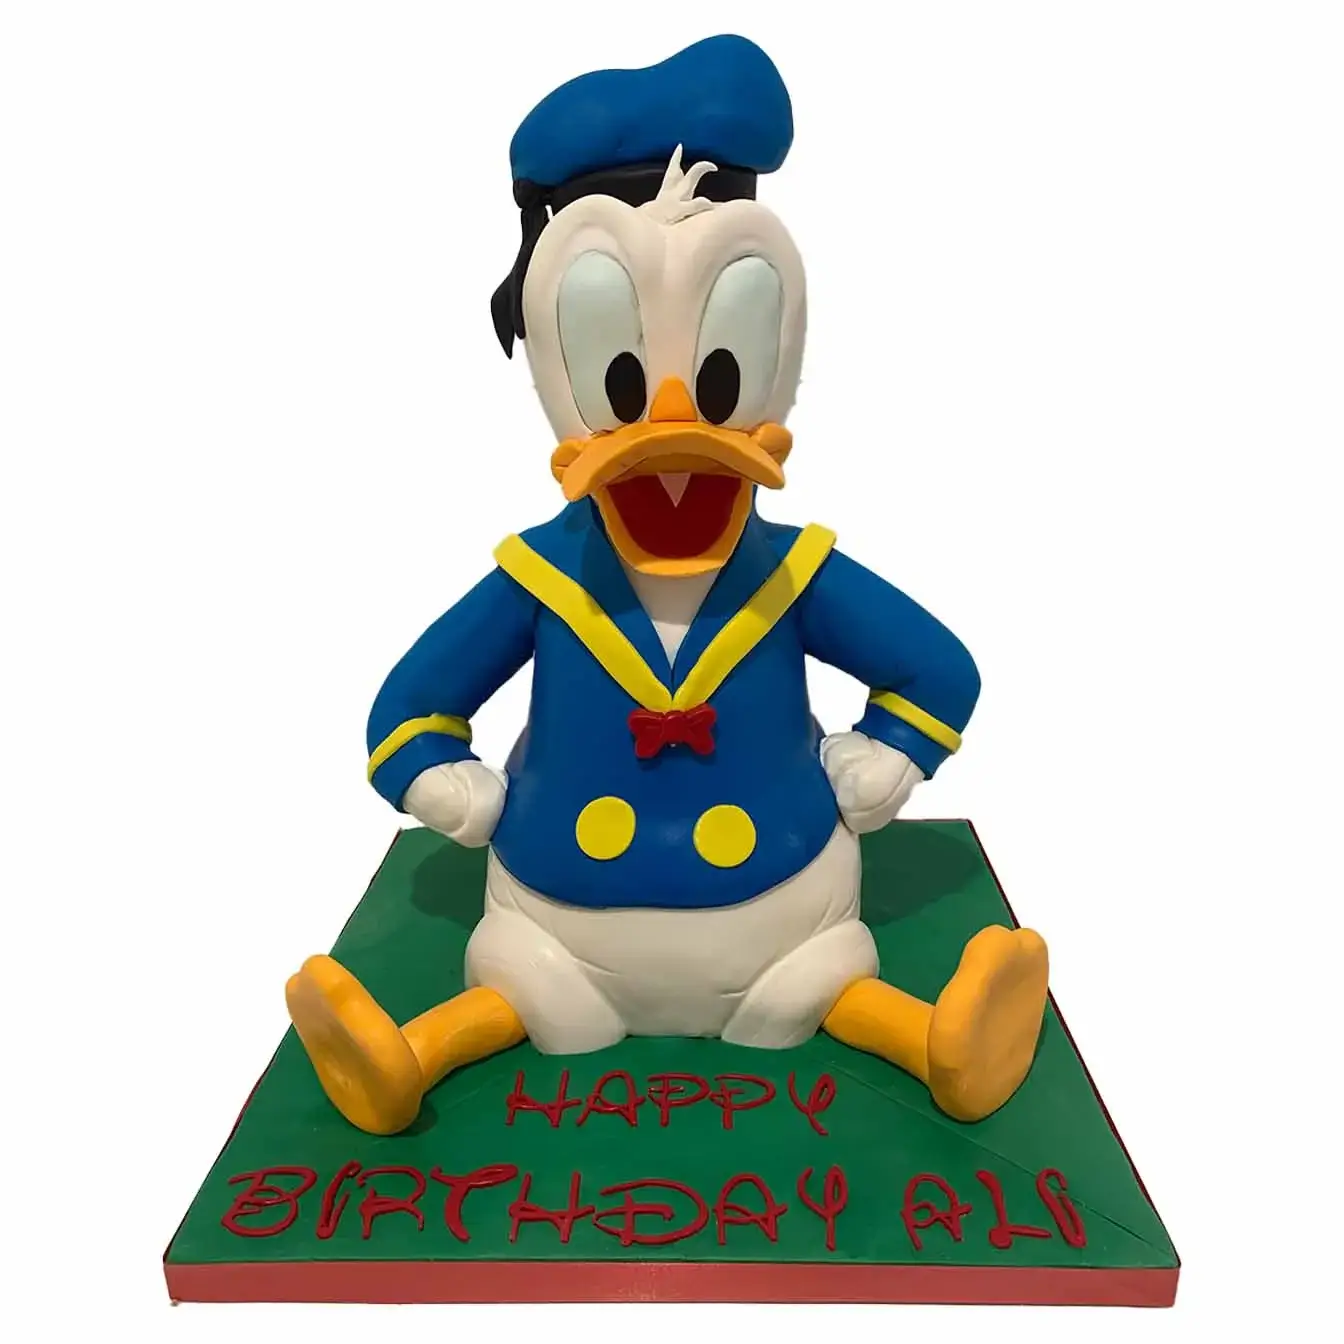 Donald Duck Delight Cake - A cake featuring a lifelike 3D representation of Donald Duck, a whimsical centerpiece for celebrations and fans of this classic character.